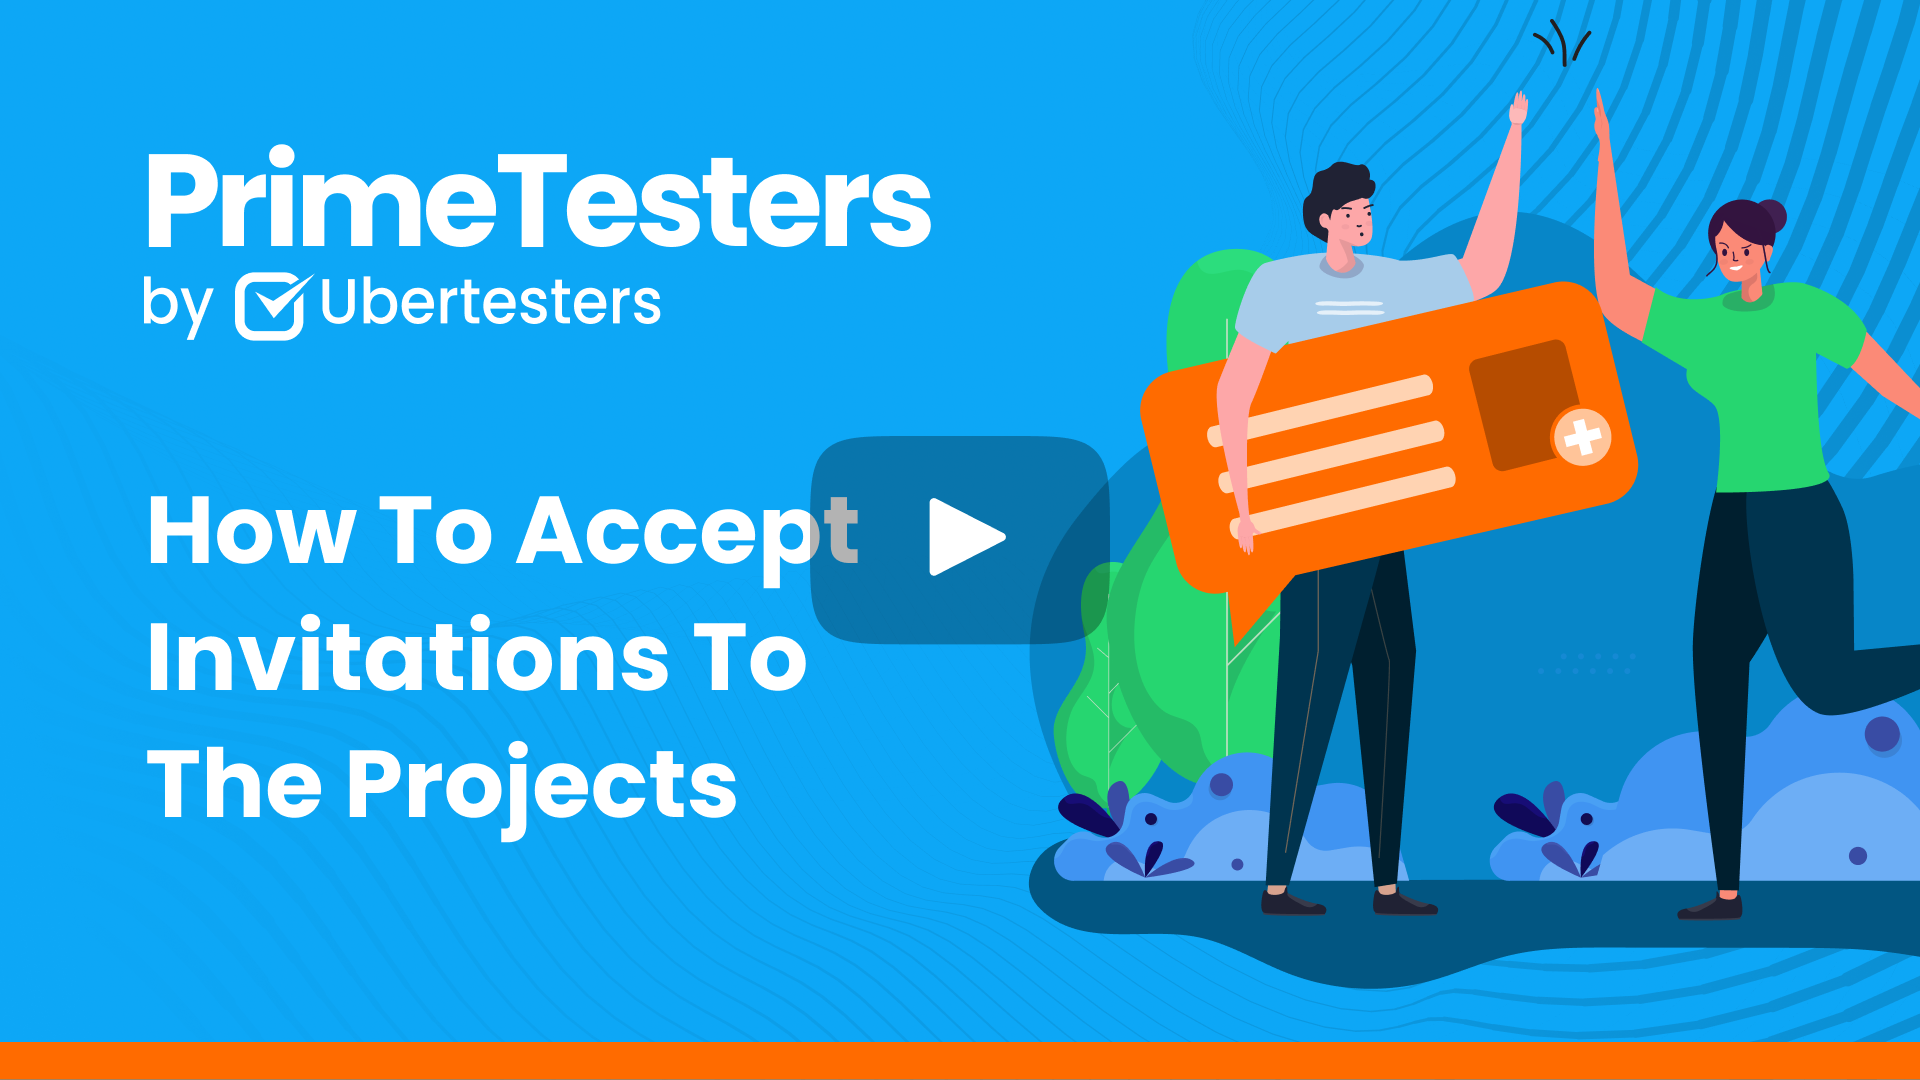 How To Accept Invitations To The Projects